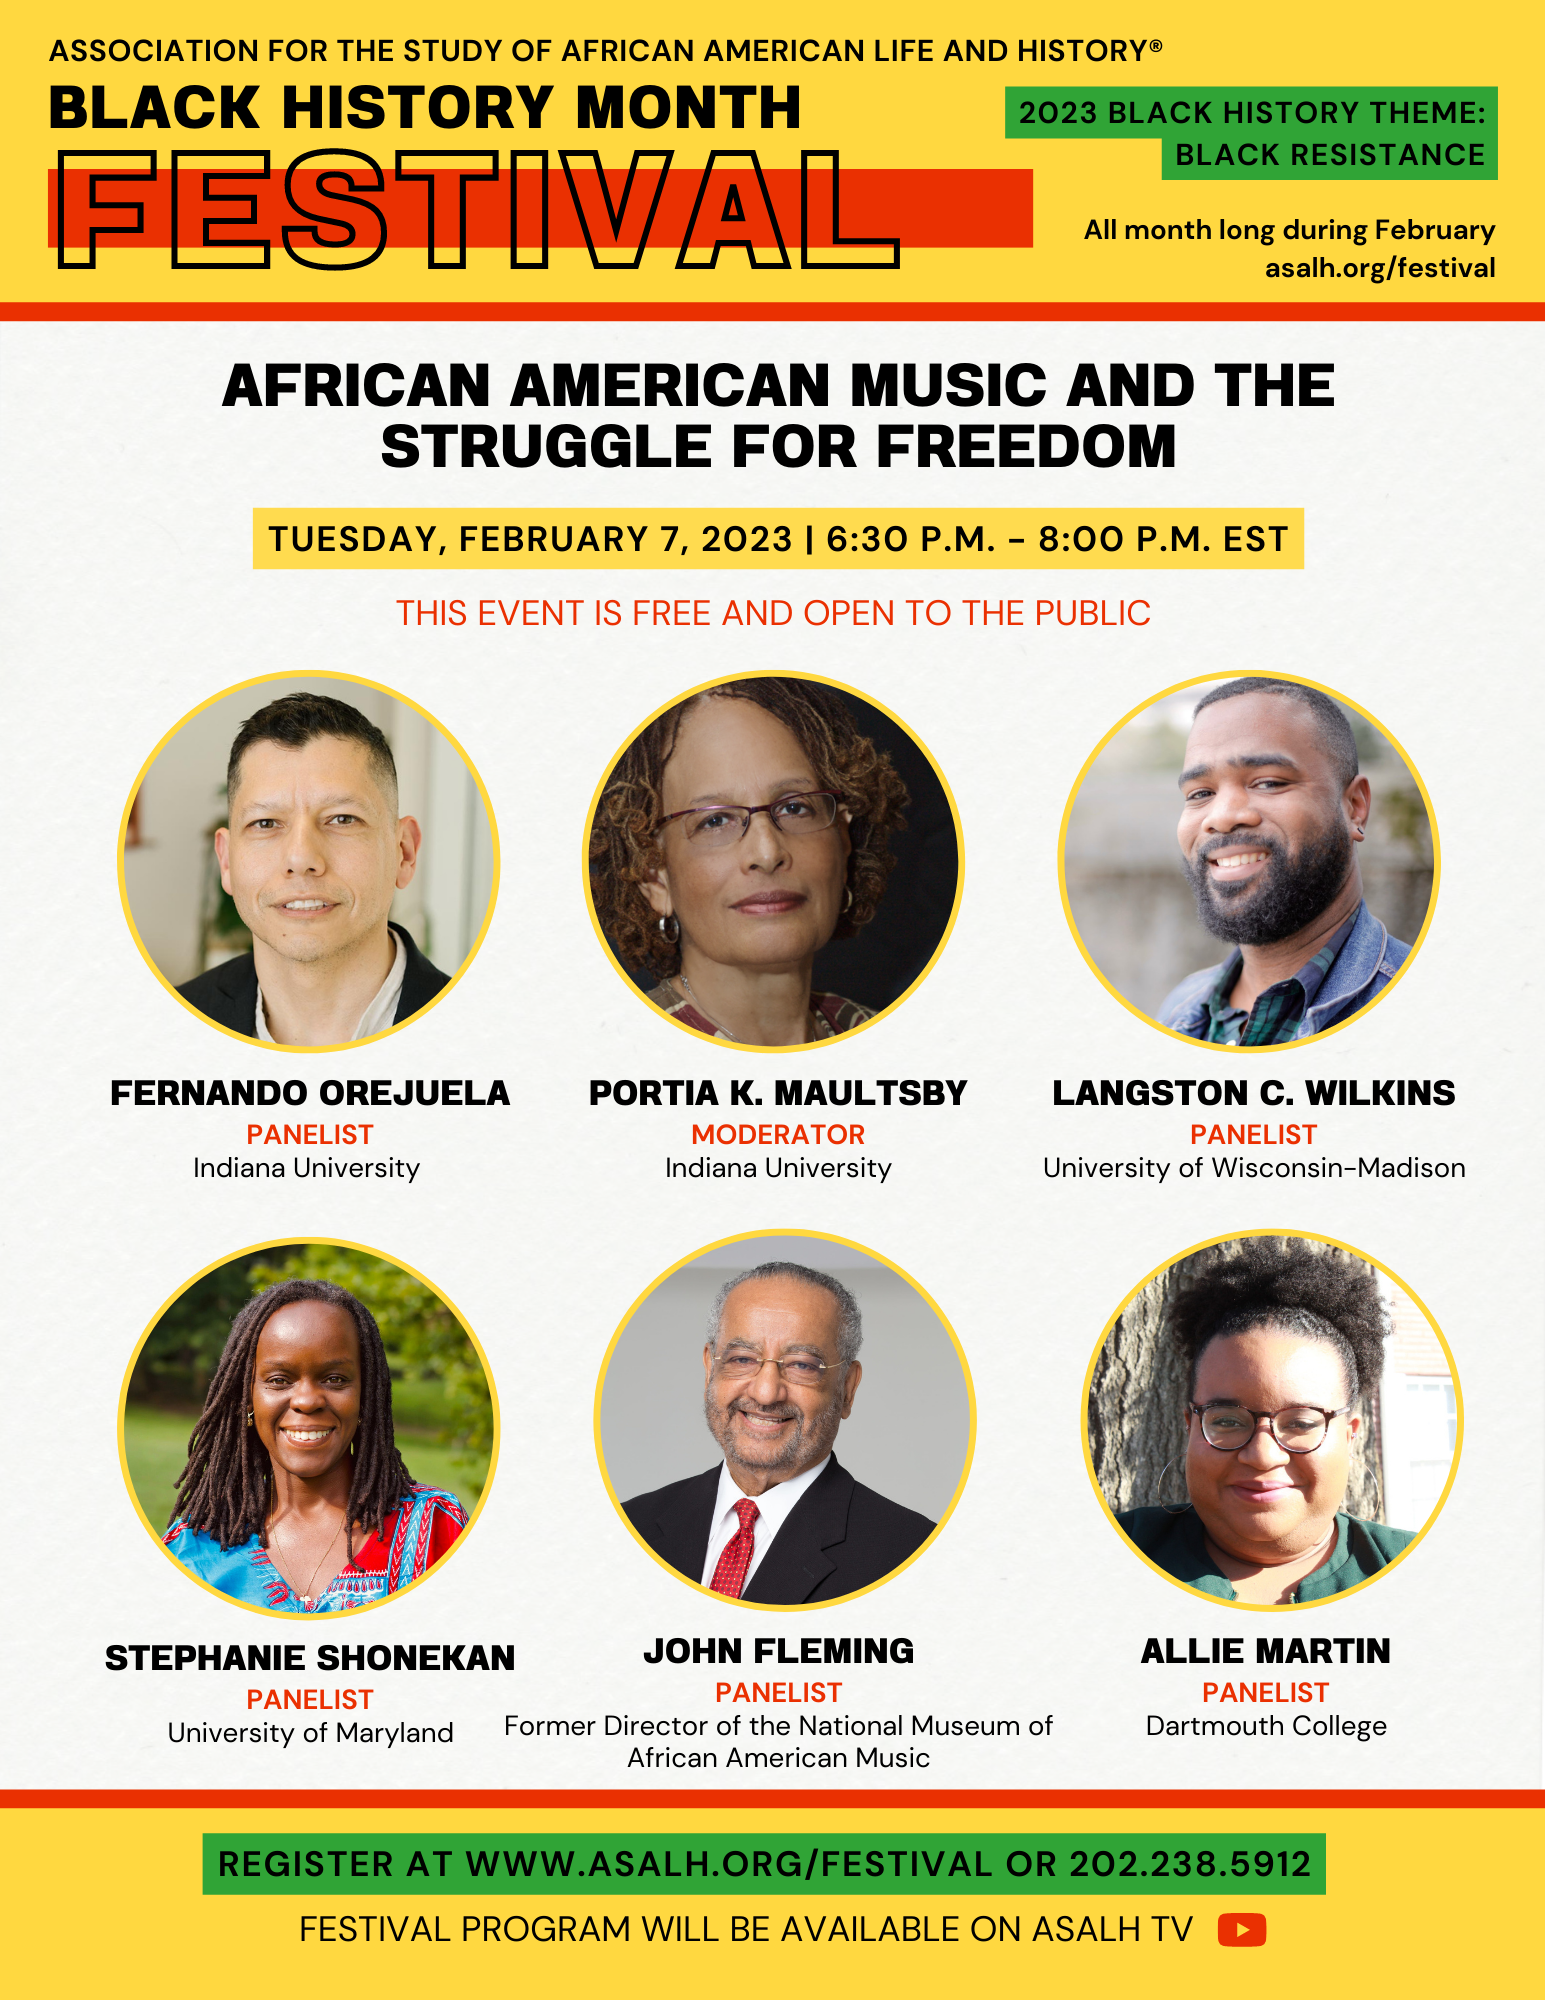 African American Music and the Struggle for Freedom